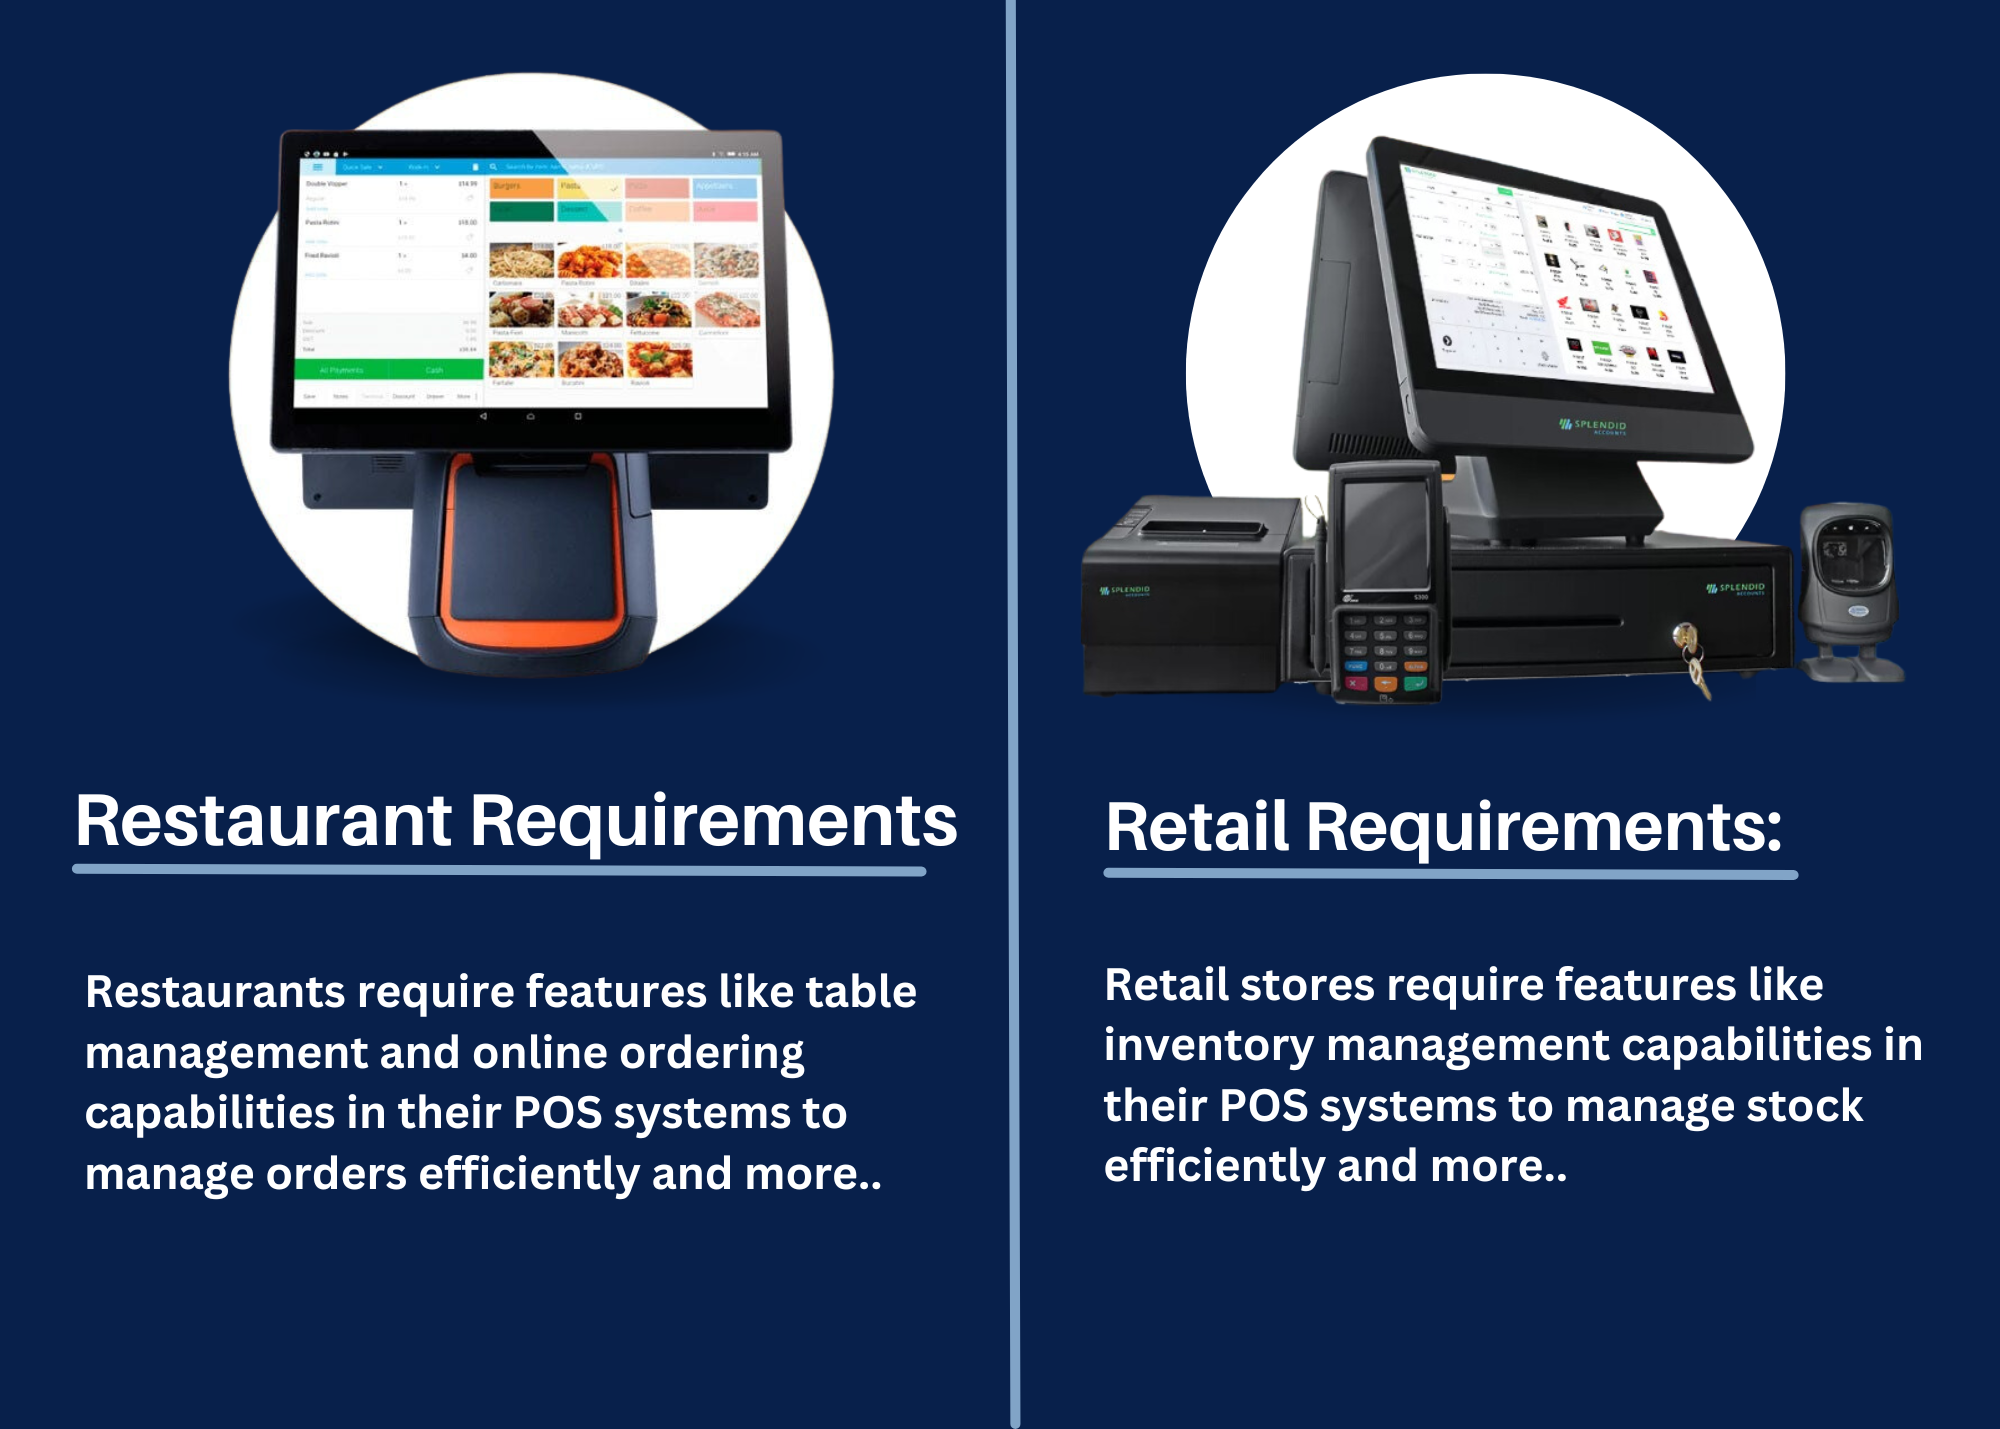 Retail stores require features like inventory management capabilities in their POS systems to manage stock efficiently.